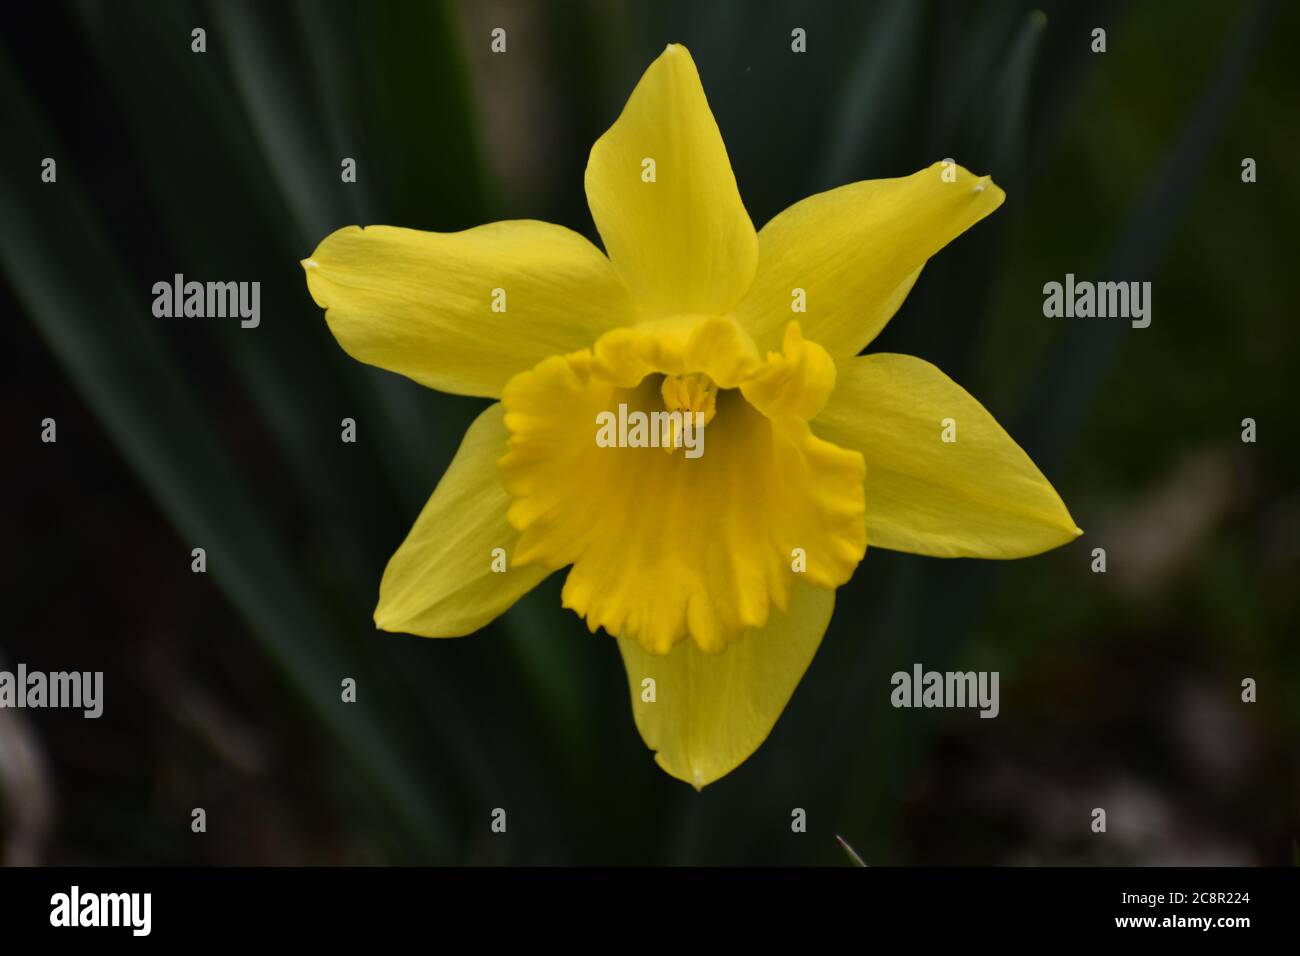 Close-up of daffodil flower (Narcissus) Stock Photo